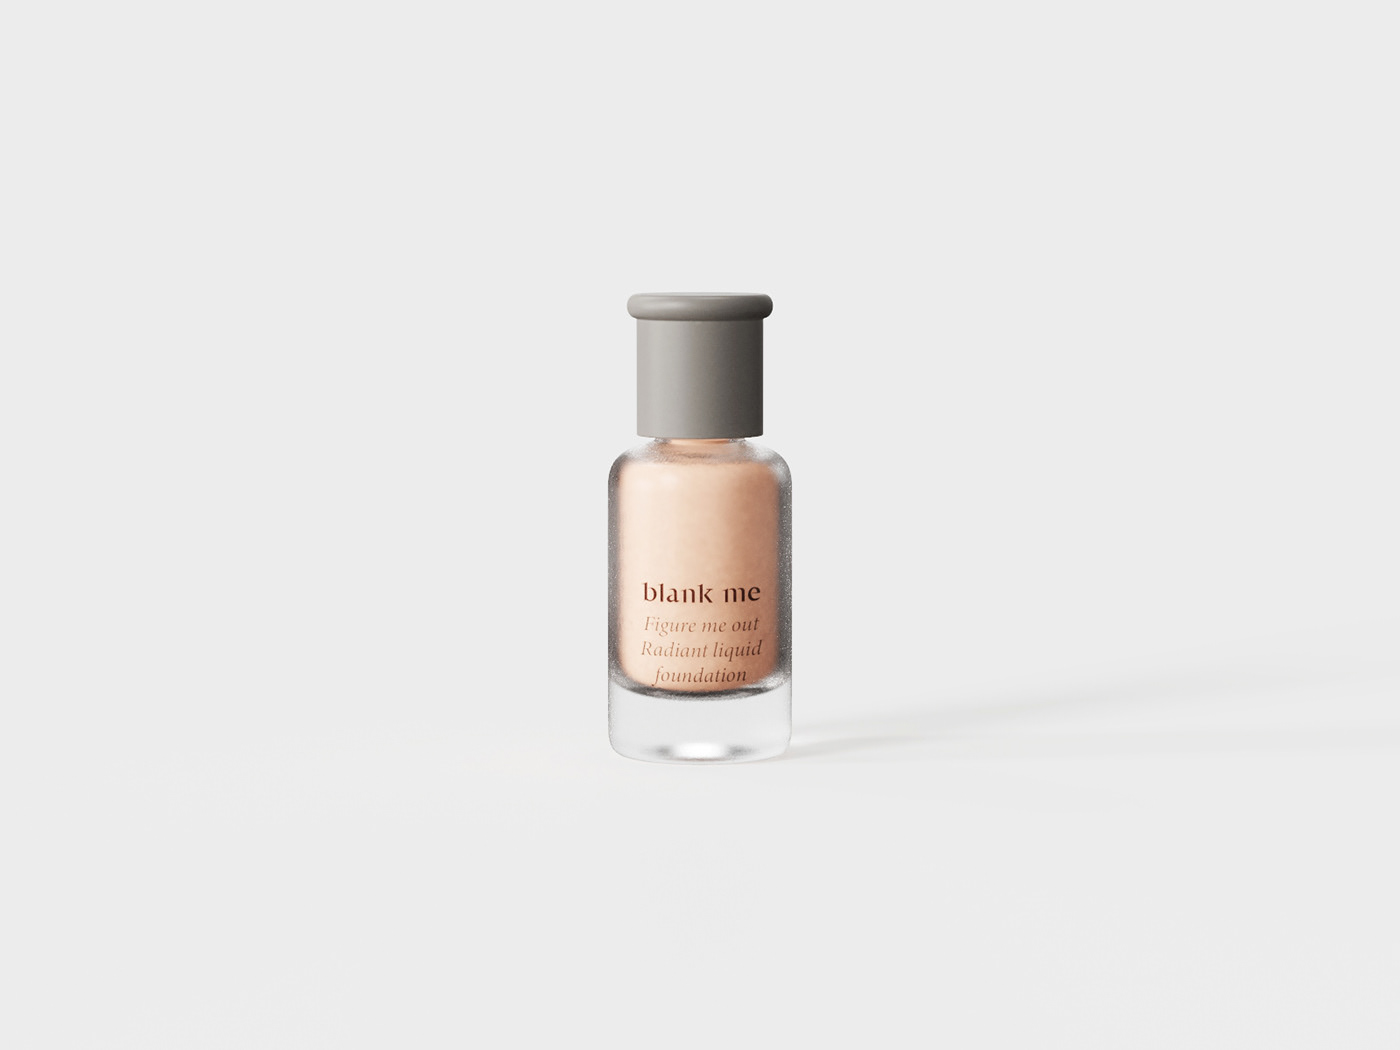 beauty foundation make-up skin care products くノ一 땅콩주소 Packaging Brand Design product design 